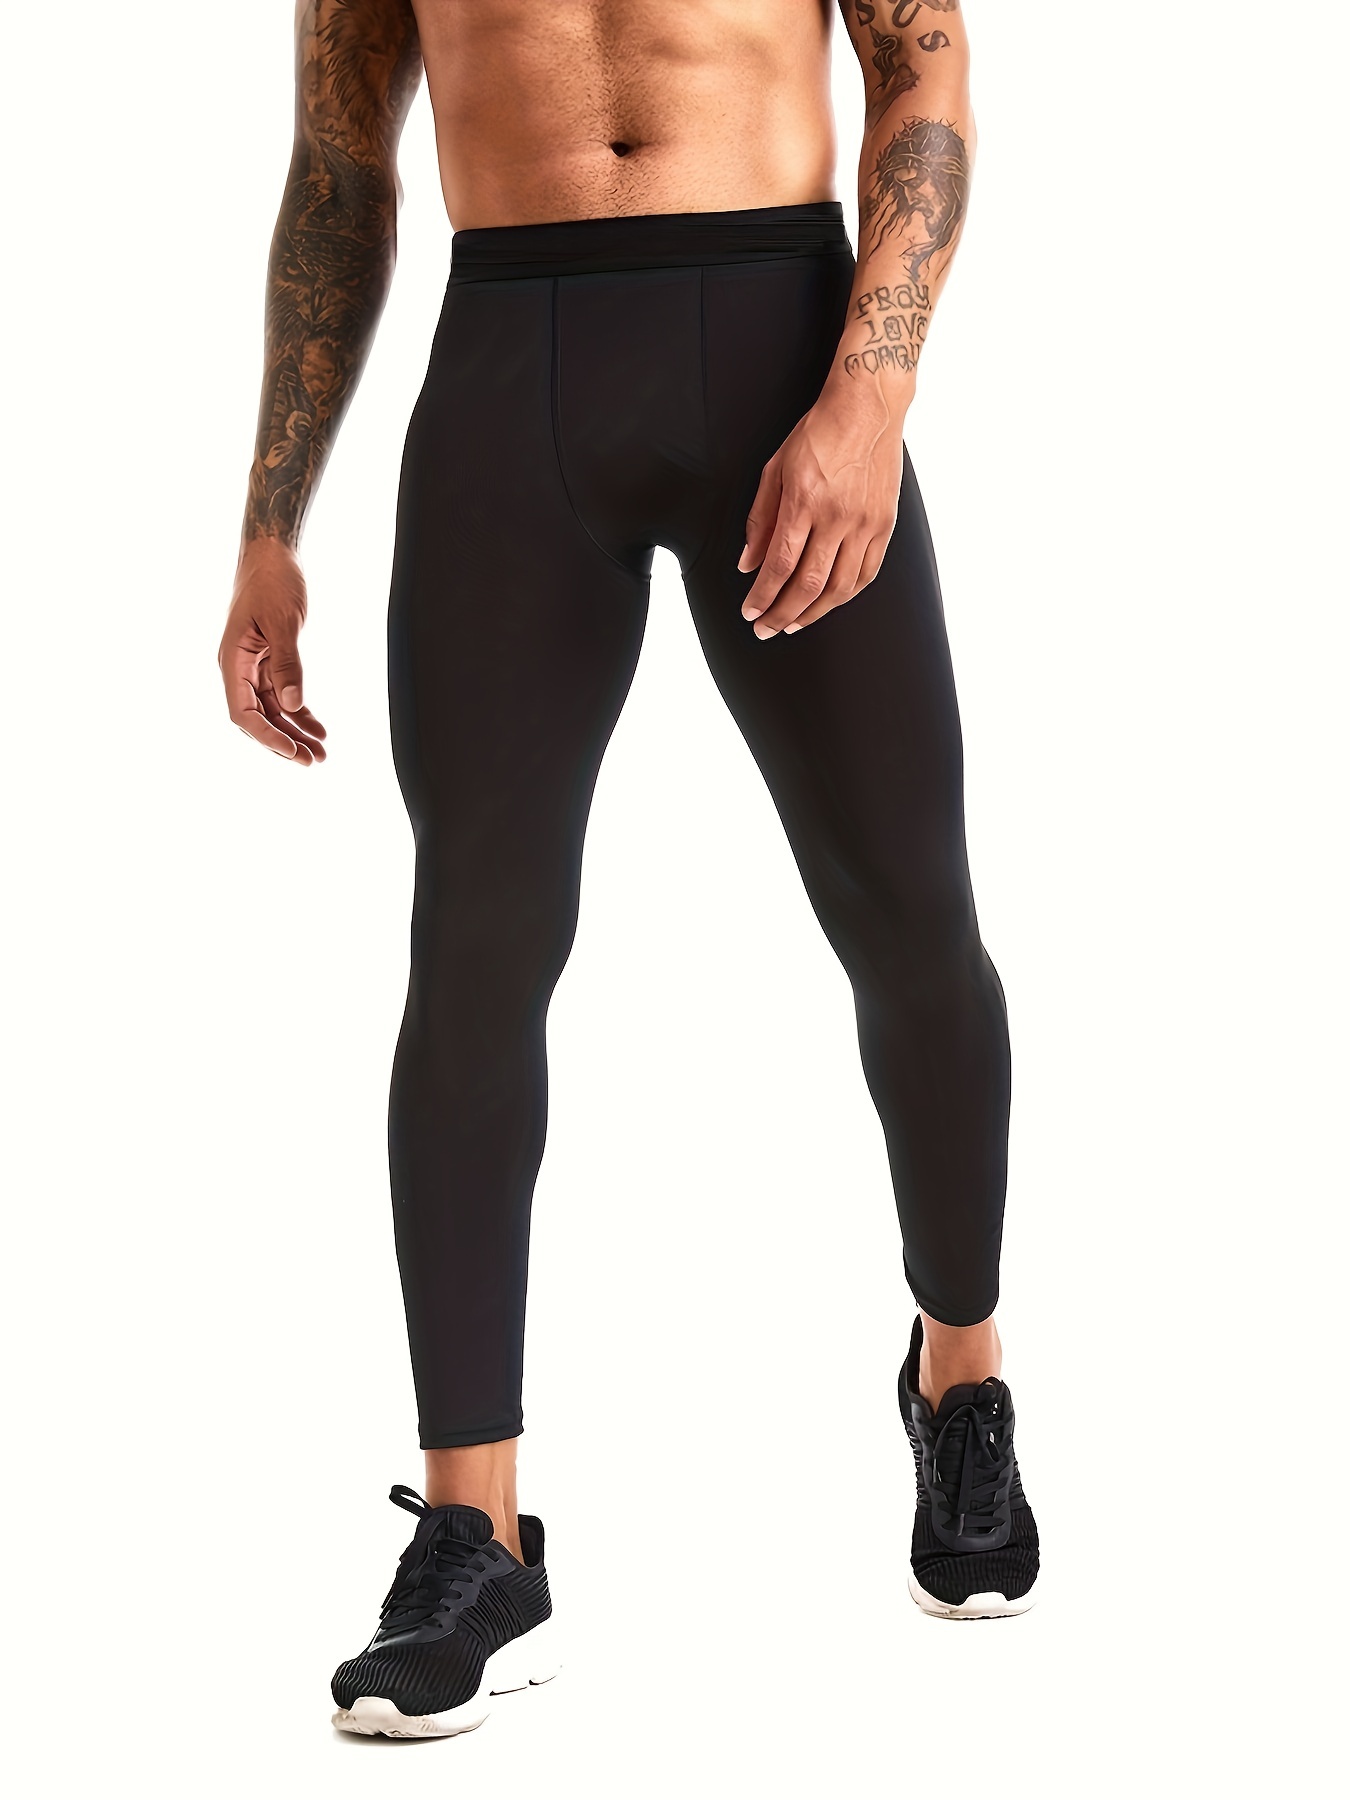 Men's Athletic Compression Pants Baselayer Quick Dry Sports Running Gym Workout  Tights Leggings 